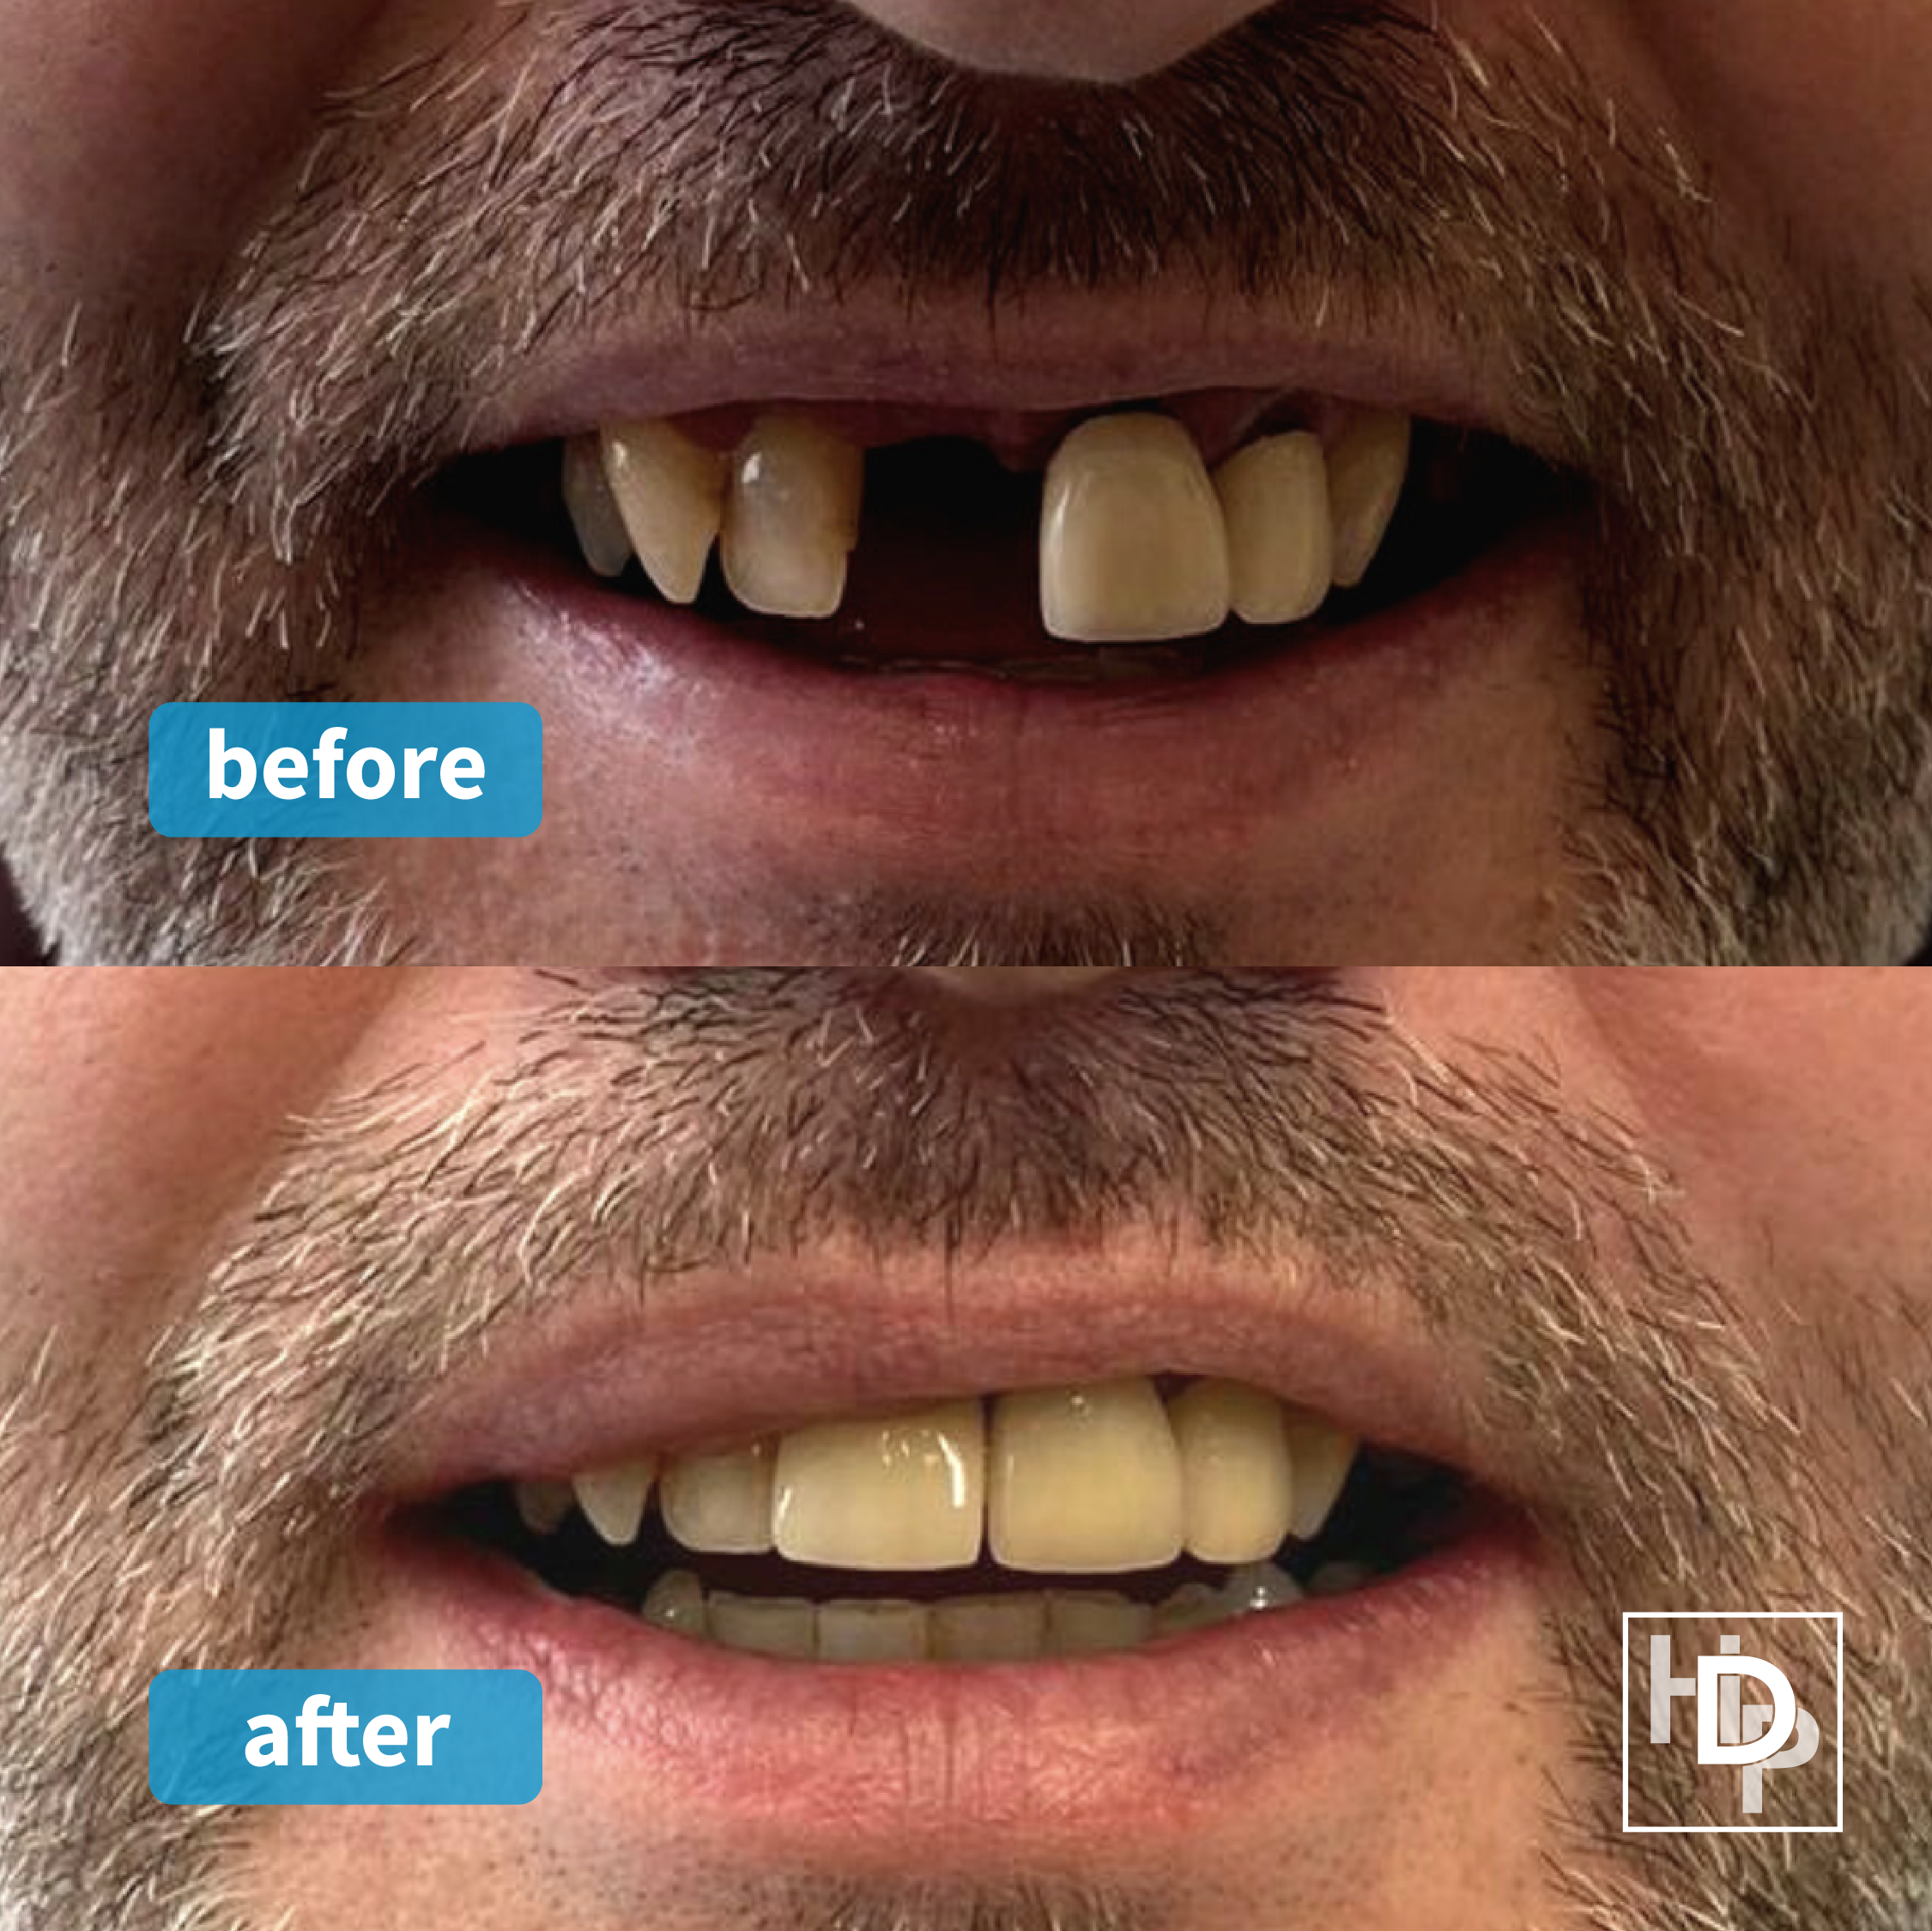 Havelock Dental Implants Clinic Smile Makeover Scarborough Whitby North Yorkshire Implant